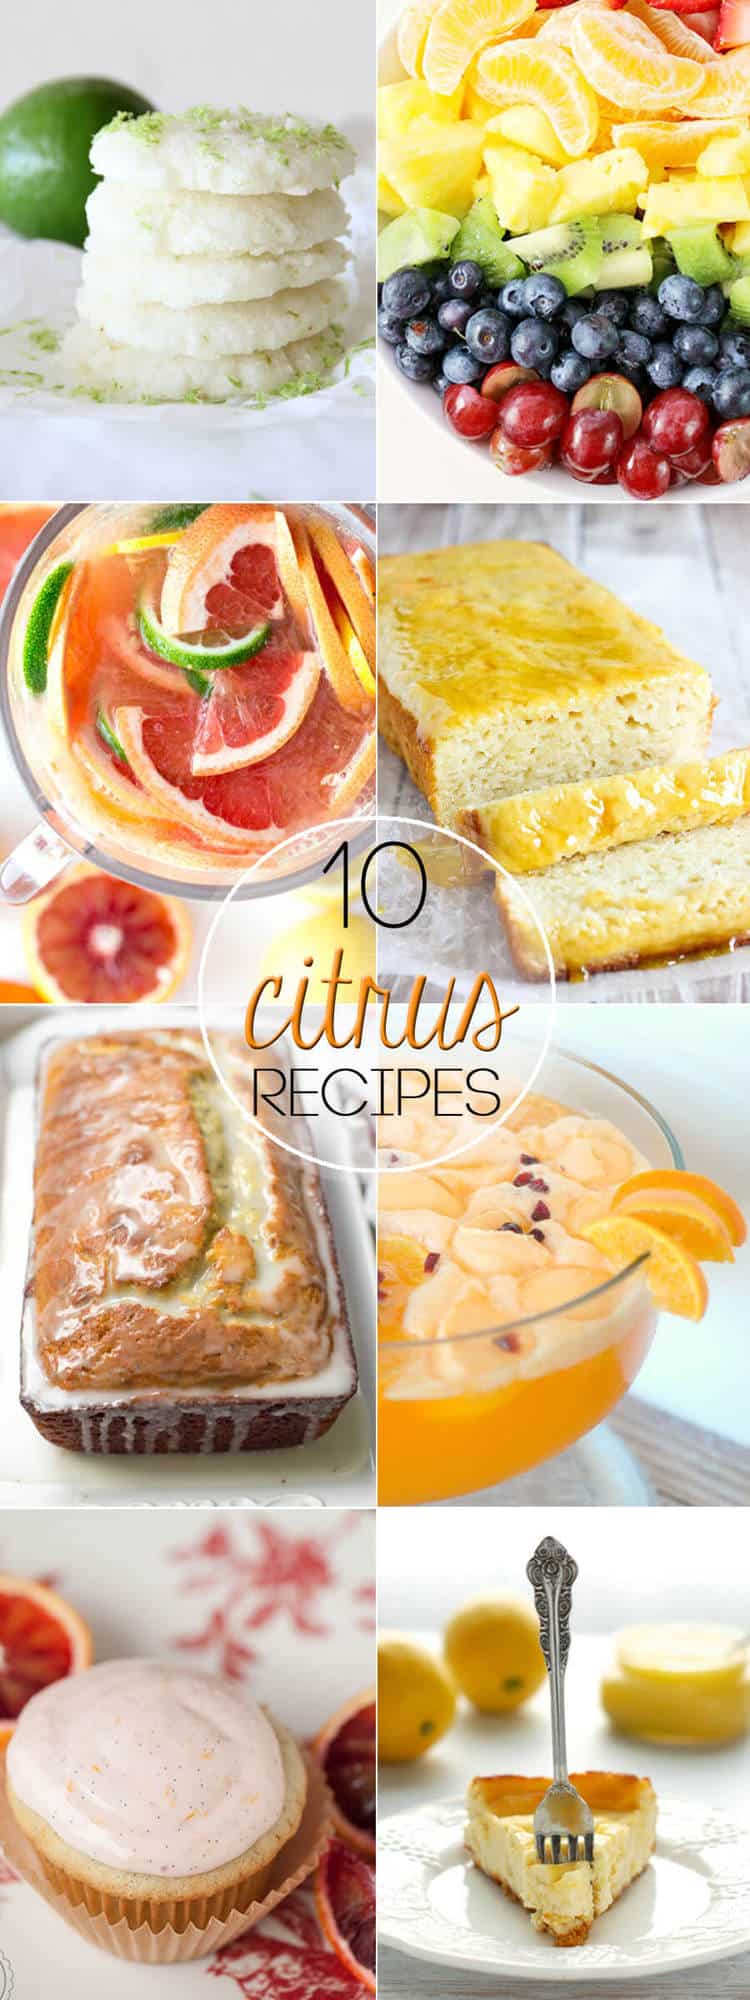 A collage of food images with text overlay - 10 Delicious Citrus Recipes